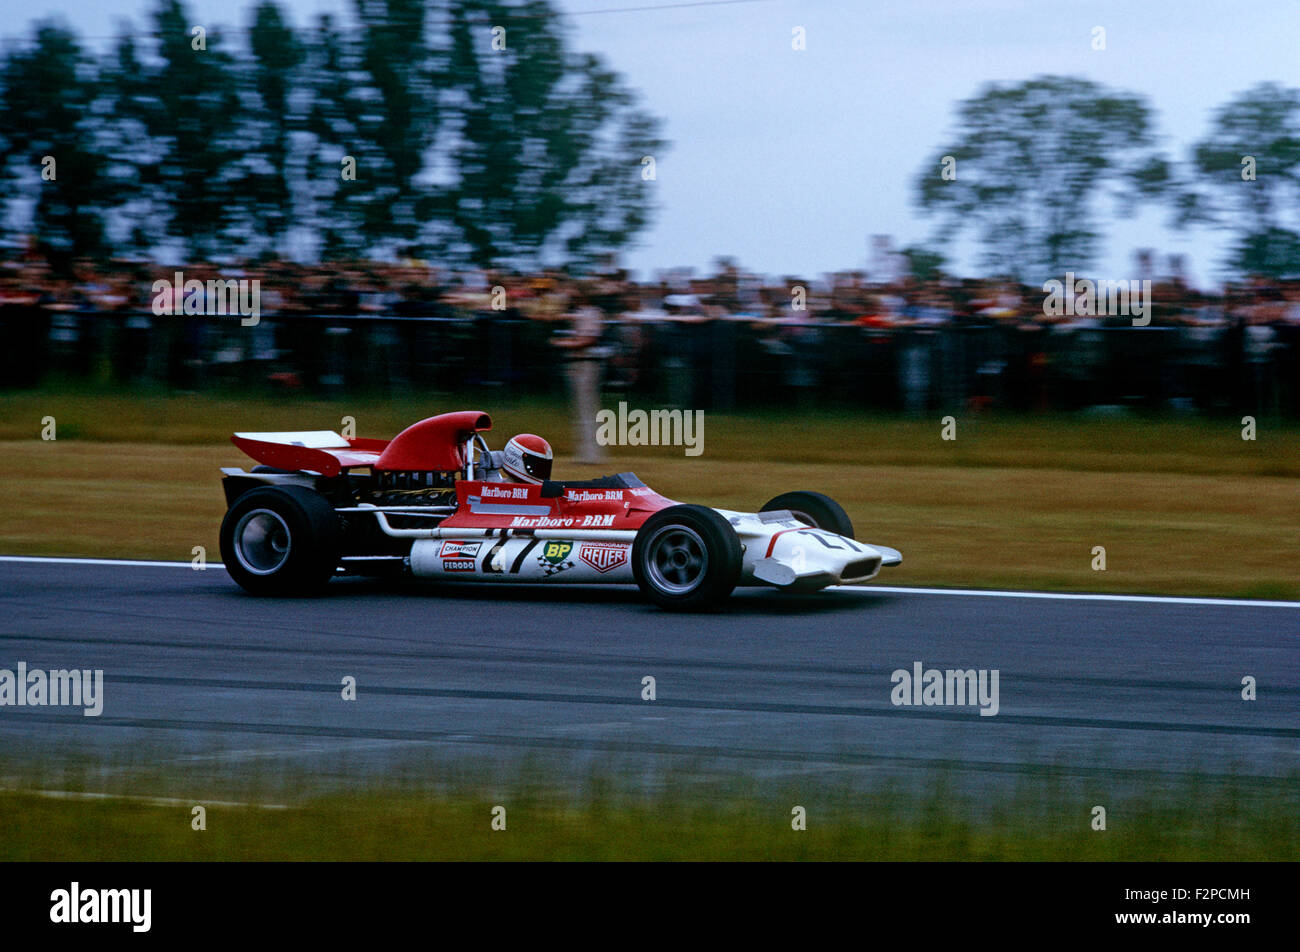 Helmut Marko in his BRM 1972 Stock Photo